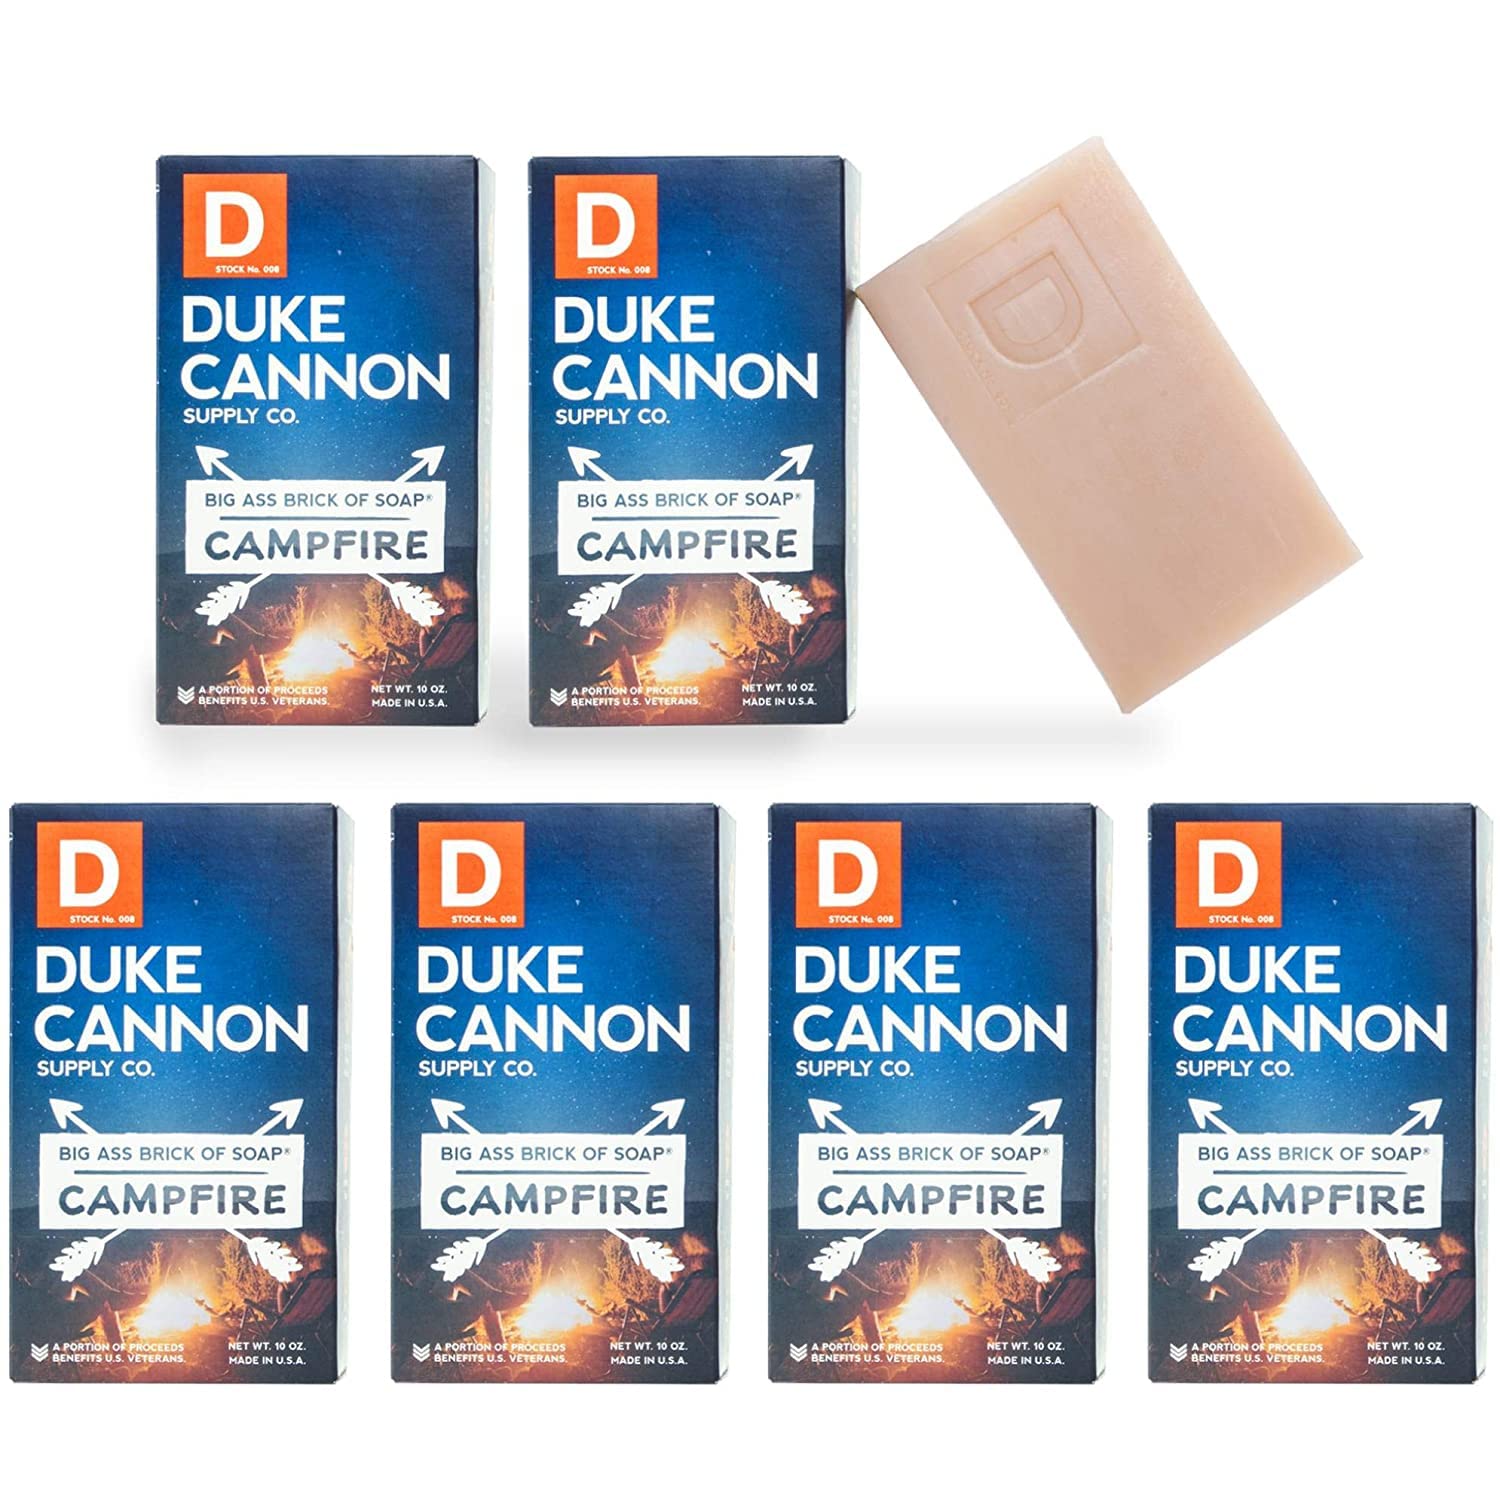 Duke Cannon Supply Co. Big Ass Brick of Soap Bar for Men Campfire (Warm, Slightly Smoky Scent) Multi-Pack - Superior Grade, Extra Large, Masculine Scents, All Skin Types, Paraben-Free, 10  (6 Pack)